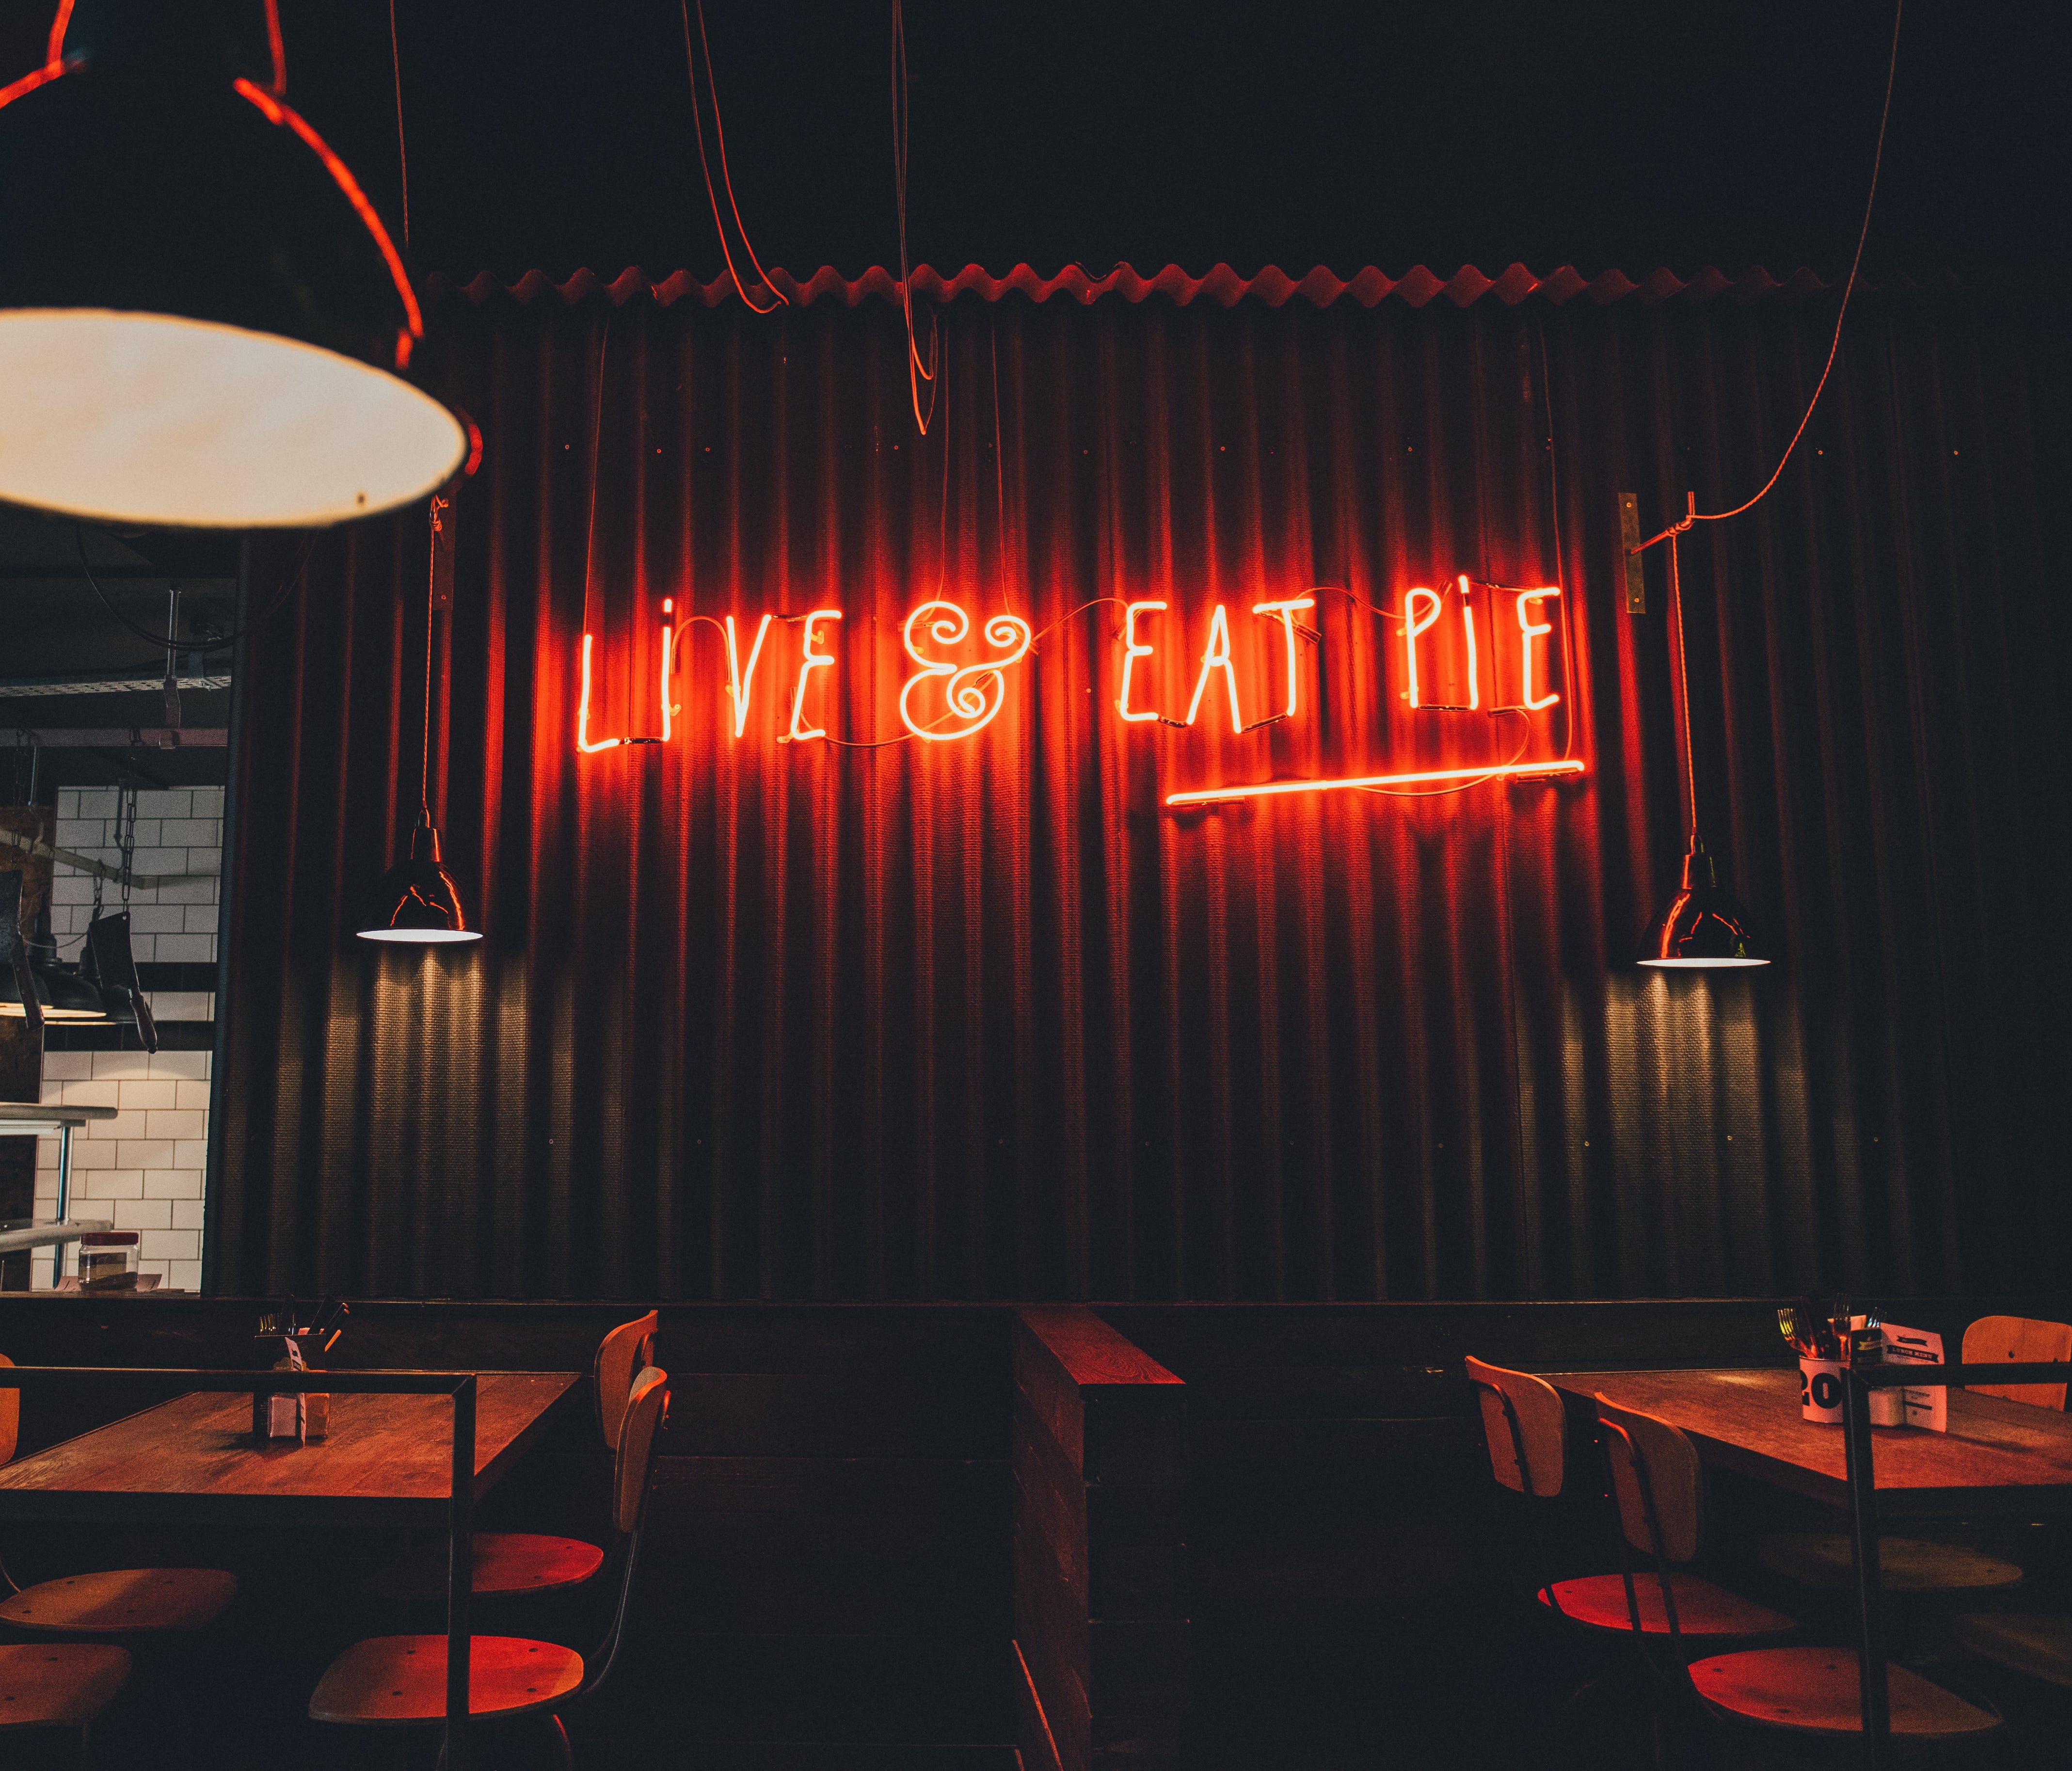 The UK's Pieminister declares 'Live & eat pie' at its Nottingham location.